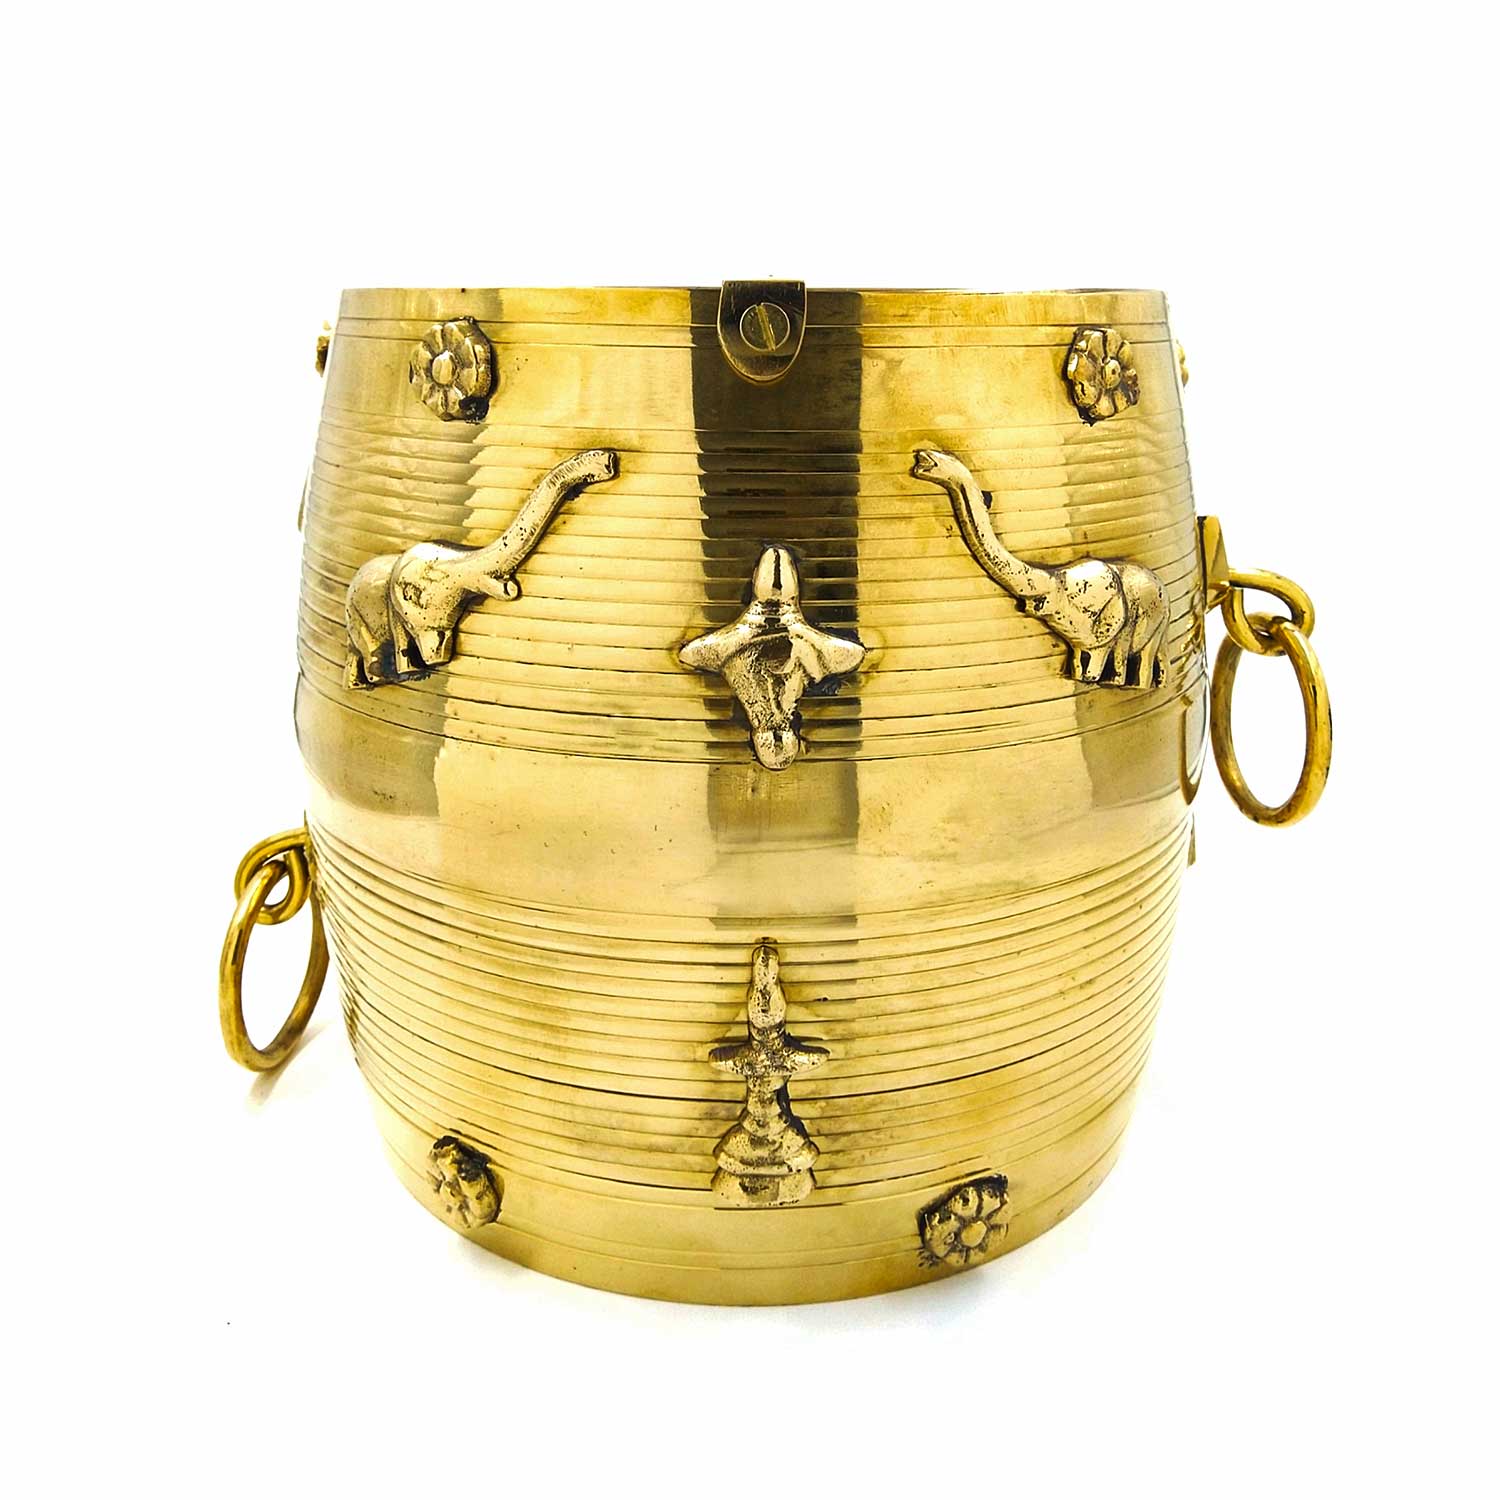 Brass Para: Authentic Kerala Measuring Vessel for Rituals and Home Decor with designs - 8.5 inch